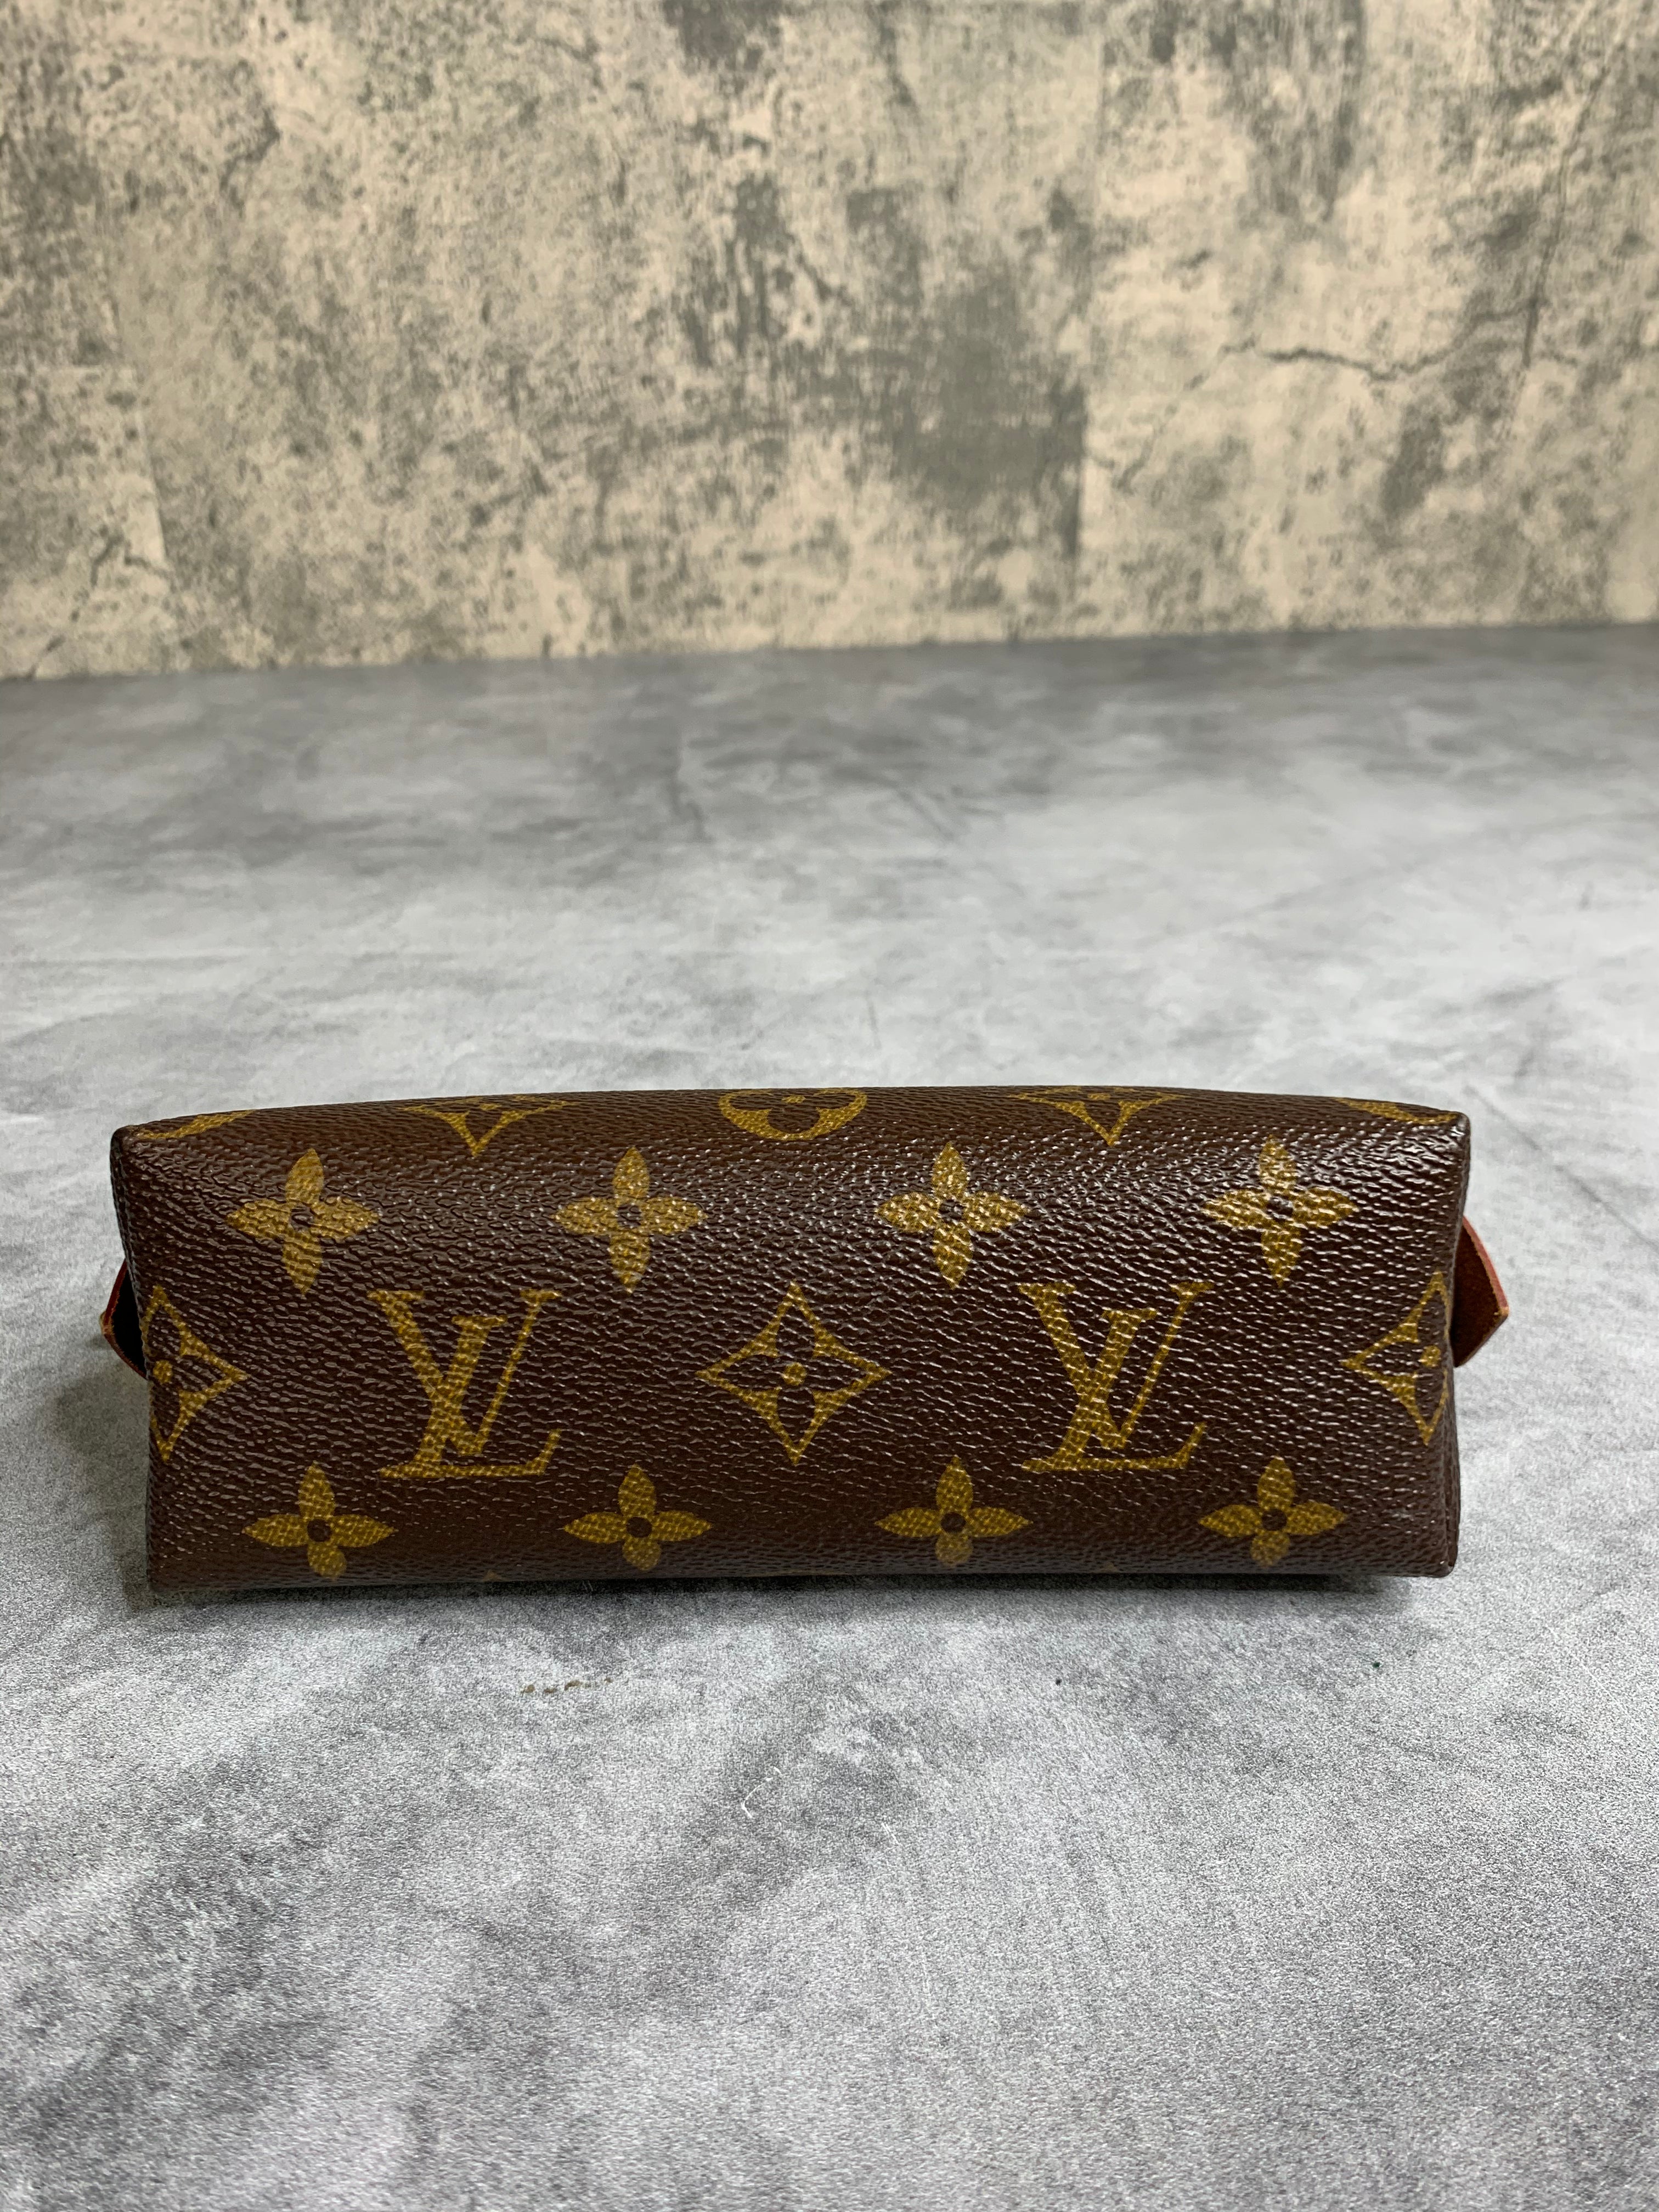 Louis Vuitton Cosmetic Bags & Cases for Women - Poshmark